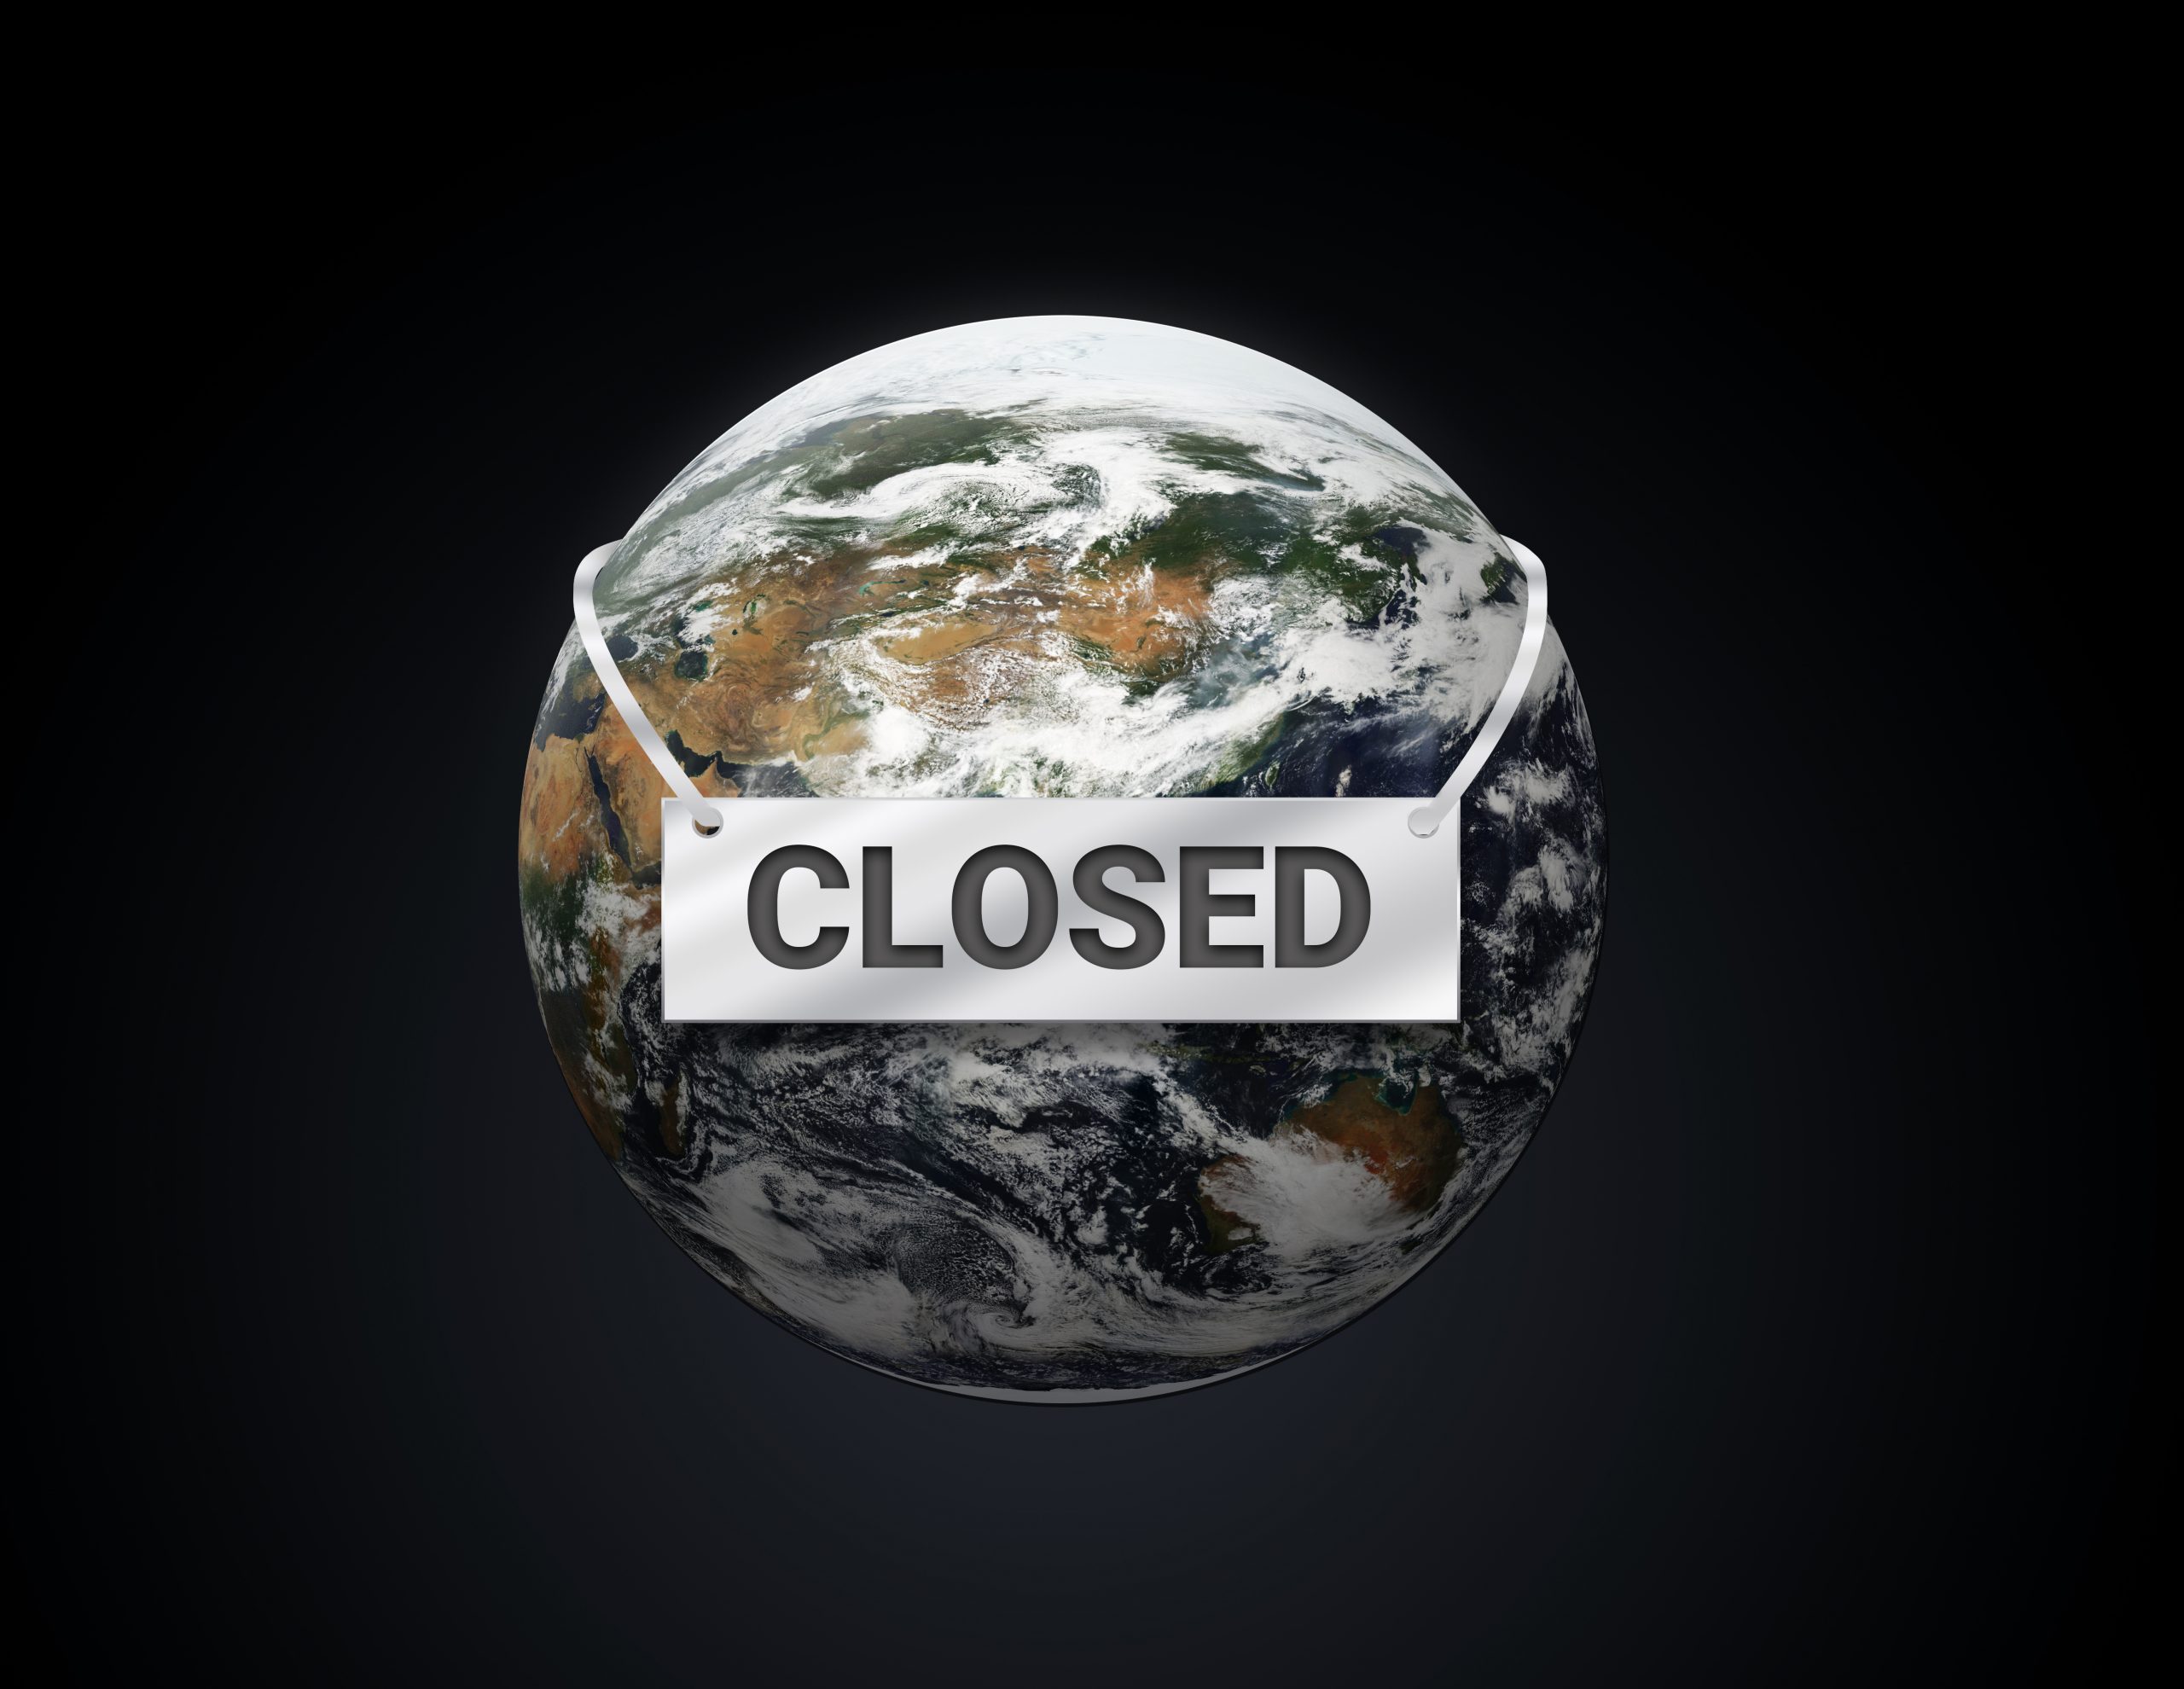 COVID-19: UN tourism agency says the world is closed